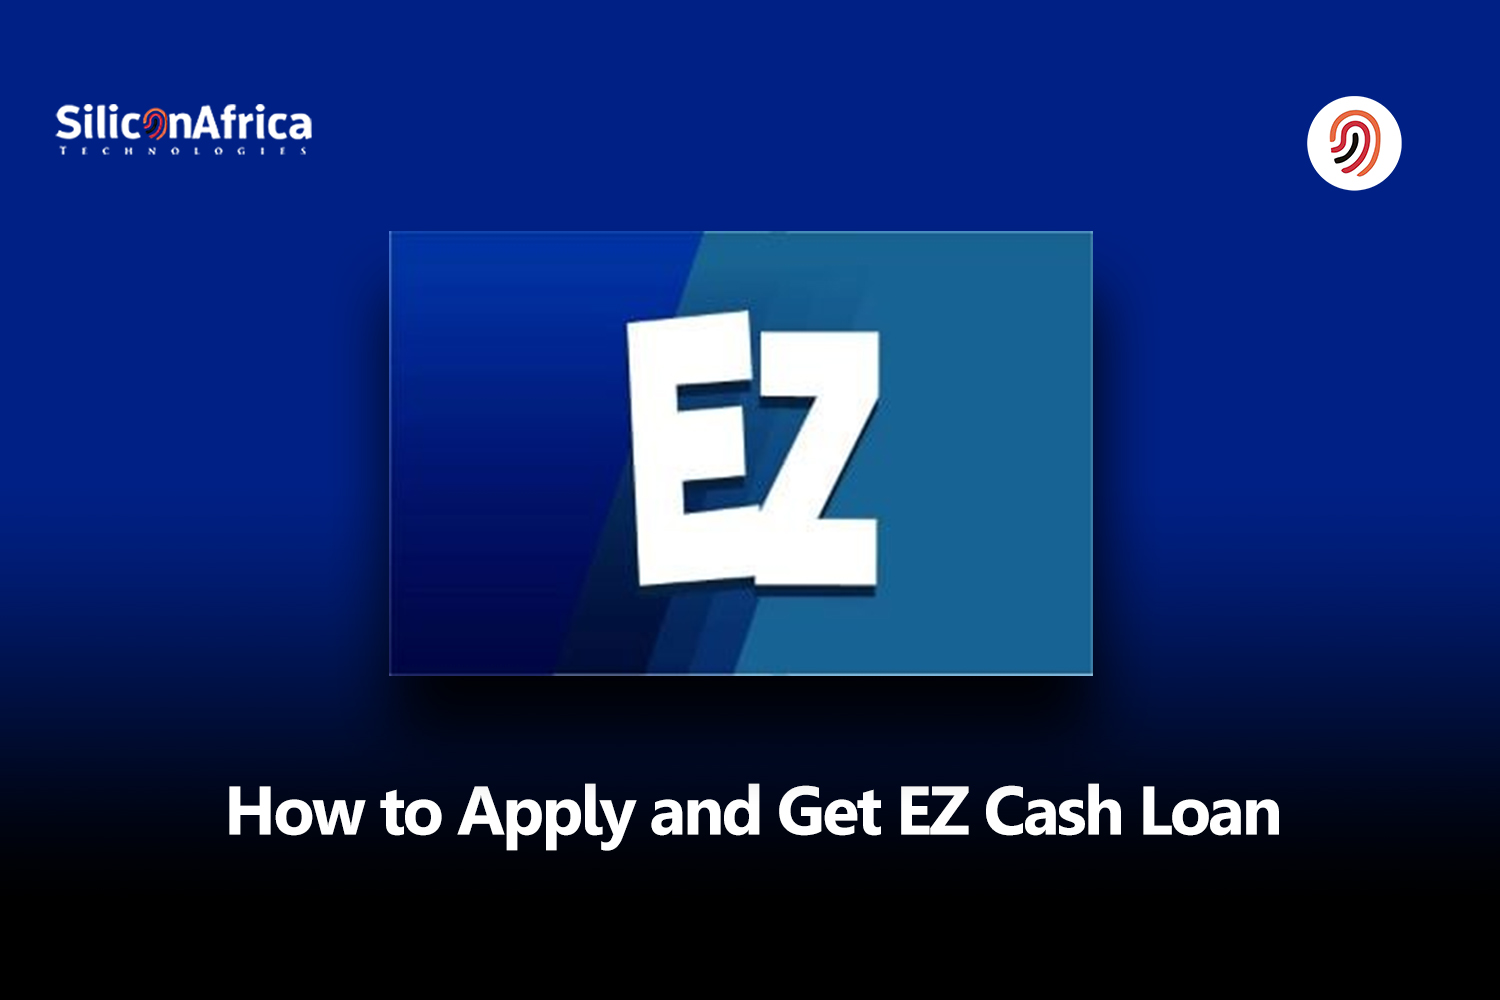 How to Apply and Get EZ Cash Loan